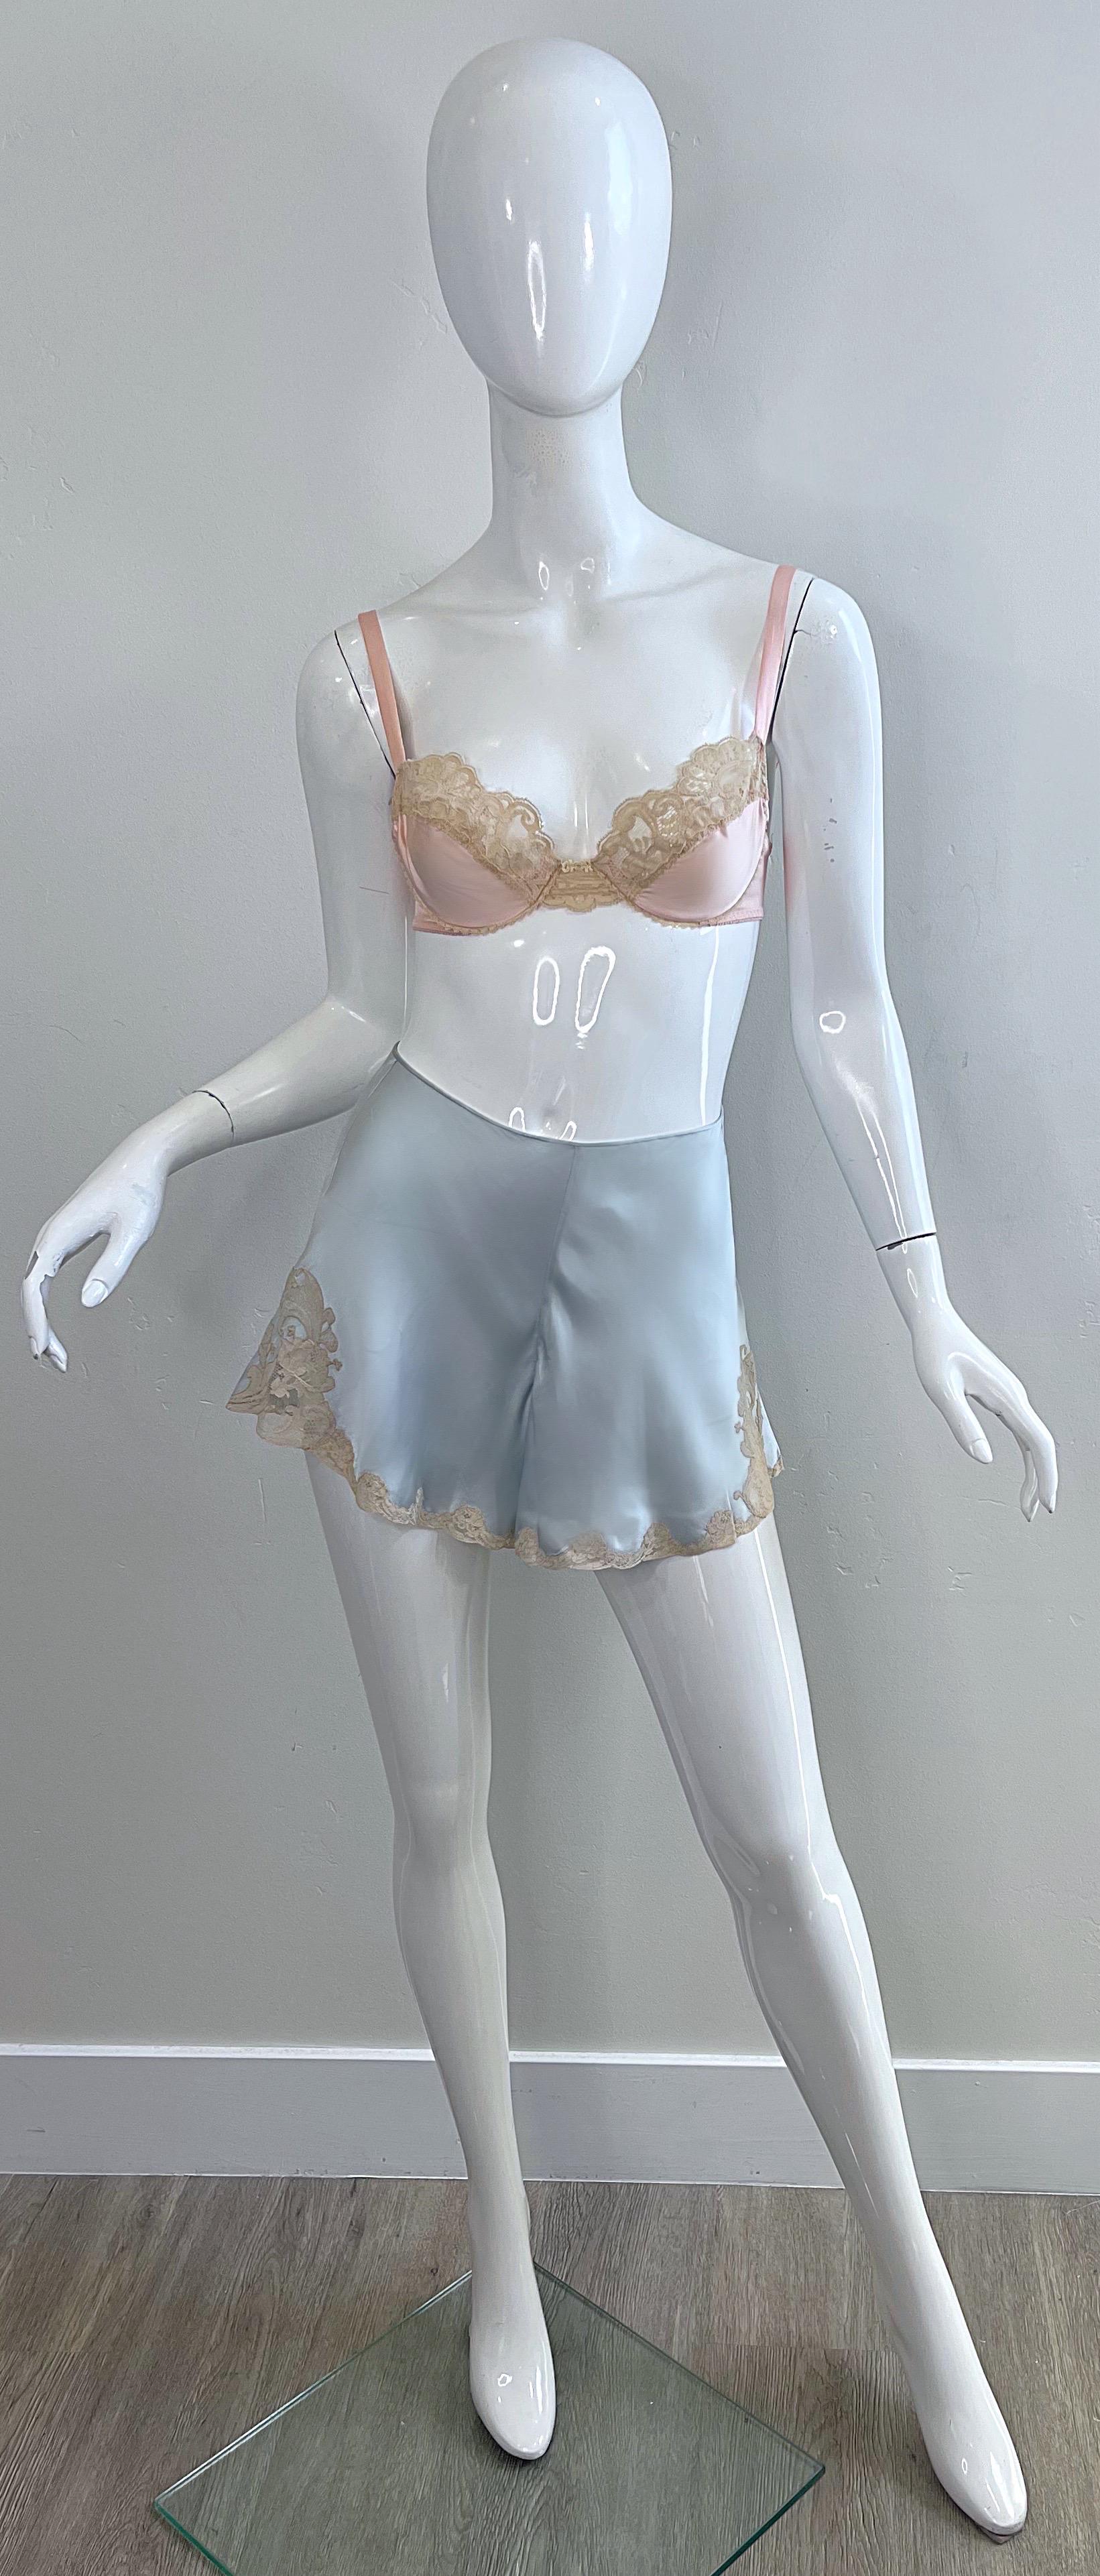 Rare 1960s Christian Dior silk lingerie set ! Features baby blue silk bloomer shorts that have a button closure on the back. Two different bras—one in pink, and one in ivory. Dior logo etched at center bust. Adjustable straps and backing.
Comes from